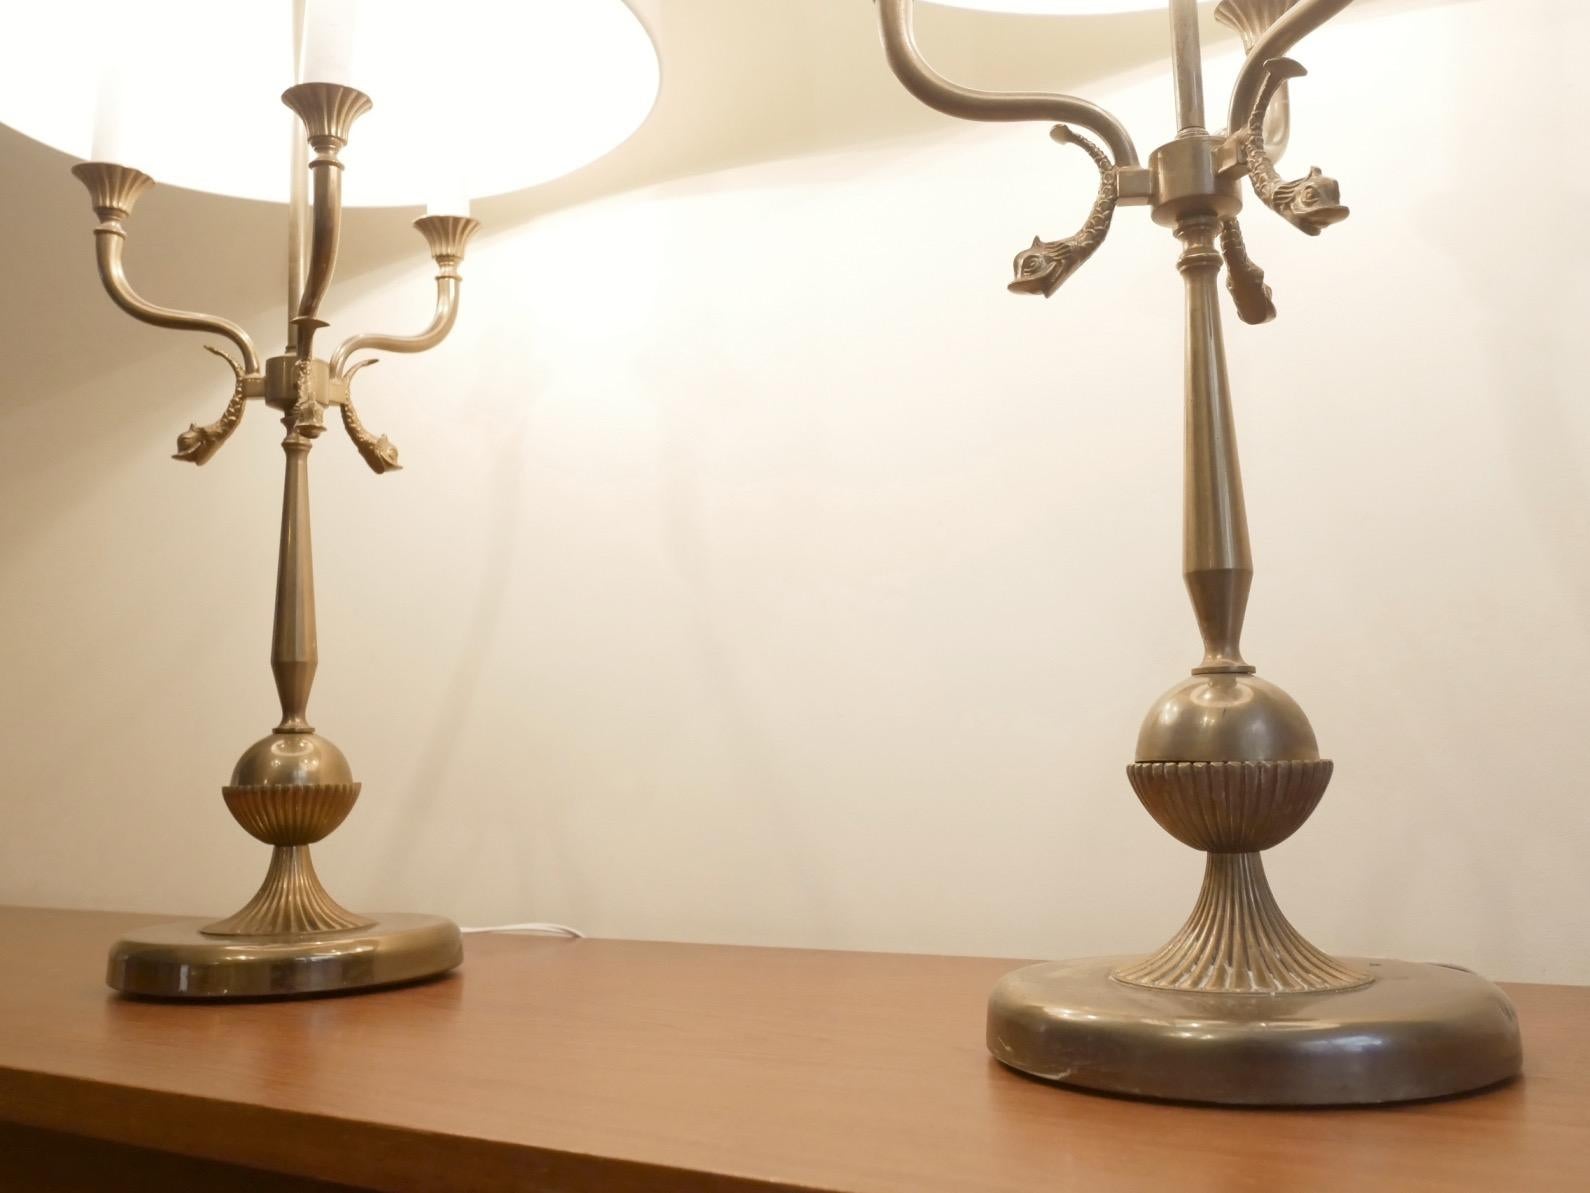 Pair of Xl Brass Candelabra Dolphin Shaped Table Lamps, 1940s (Messing) im Angebot